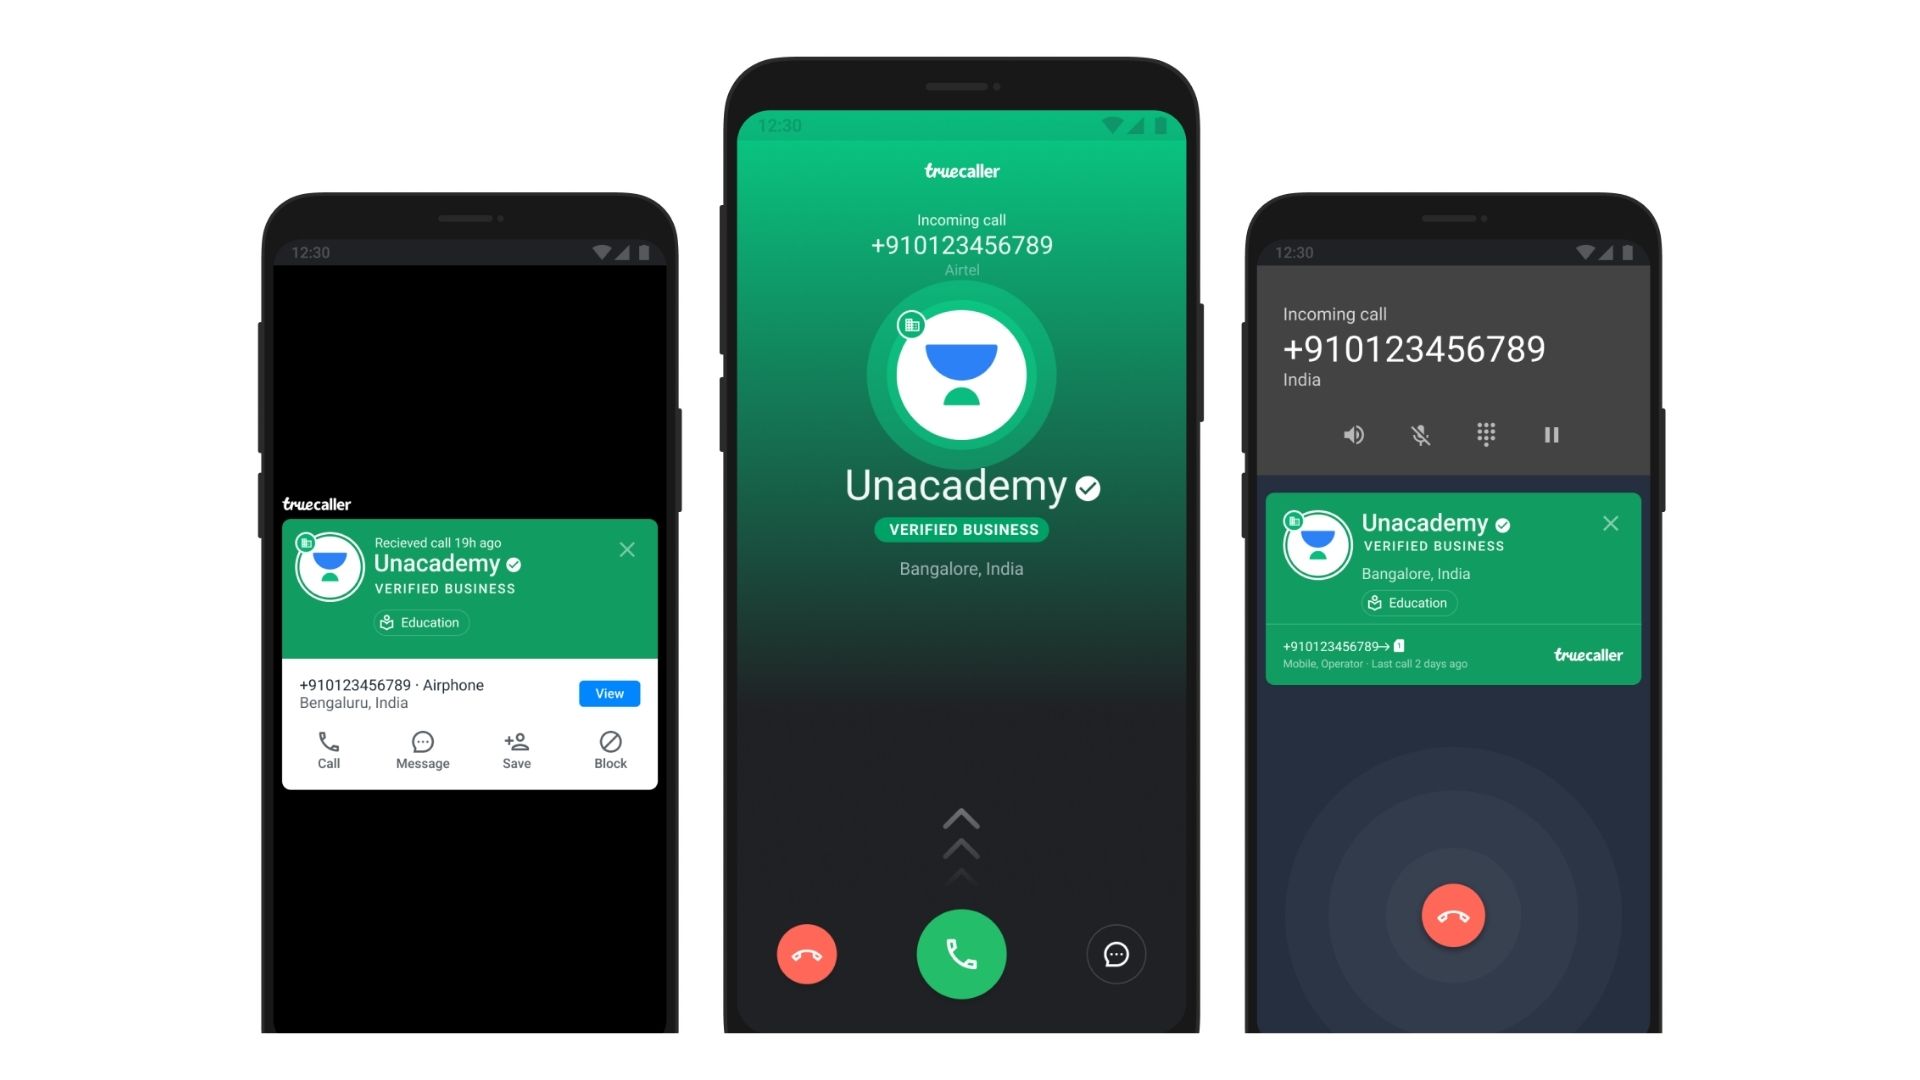 Truecaller Business Identity solution allows businesses to verify their identities using a GREEN VERIFIED BUSINESS BADGE with the accurate name of the business, the logo, and the photo of the organisation.